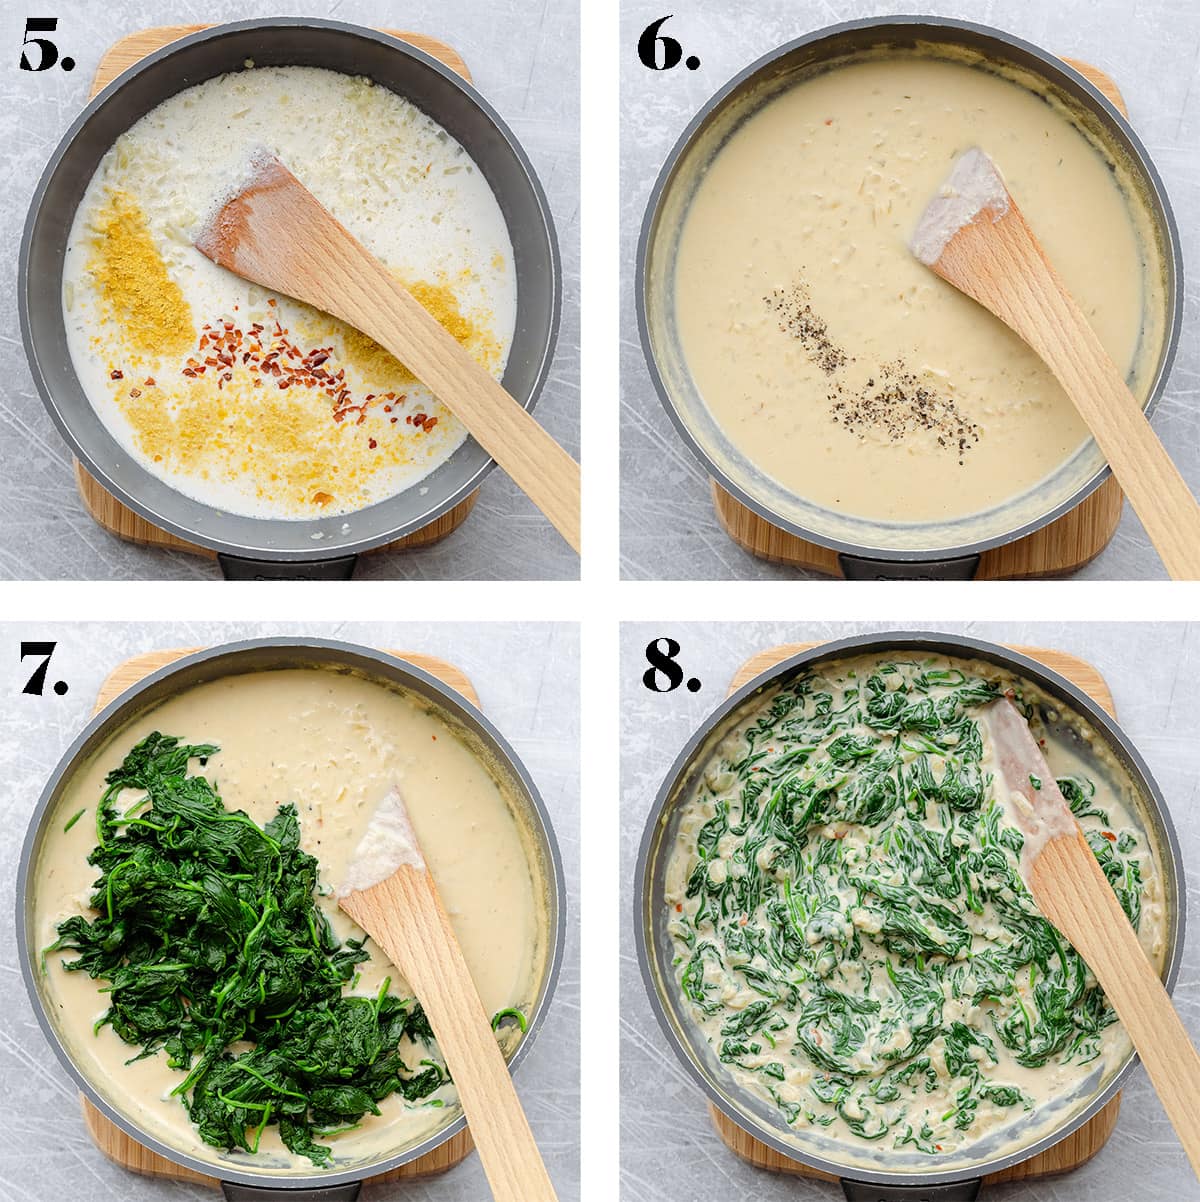 4 process photos of making of vegan creamed spinach. Mixing milk and spices, and adding spinach.